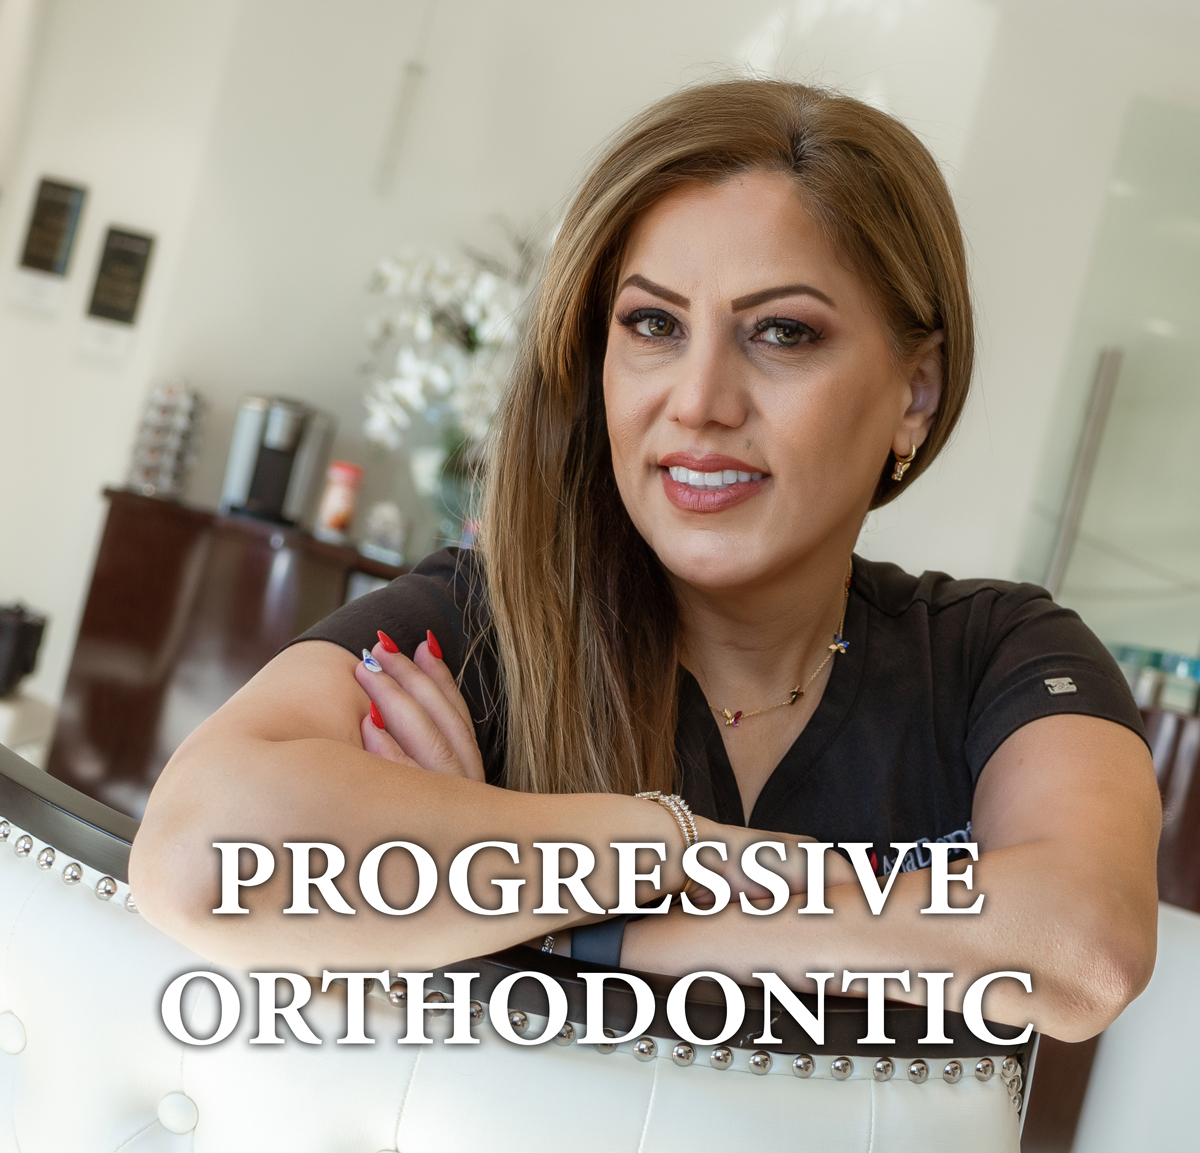 Dr. Maryam Horiyat in office with progressive orthodontic text on the image